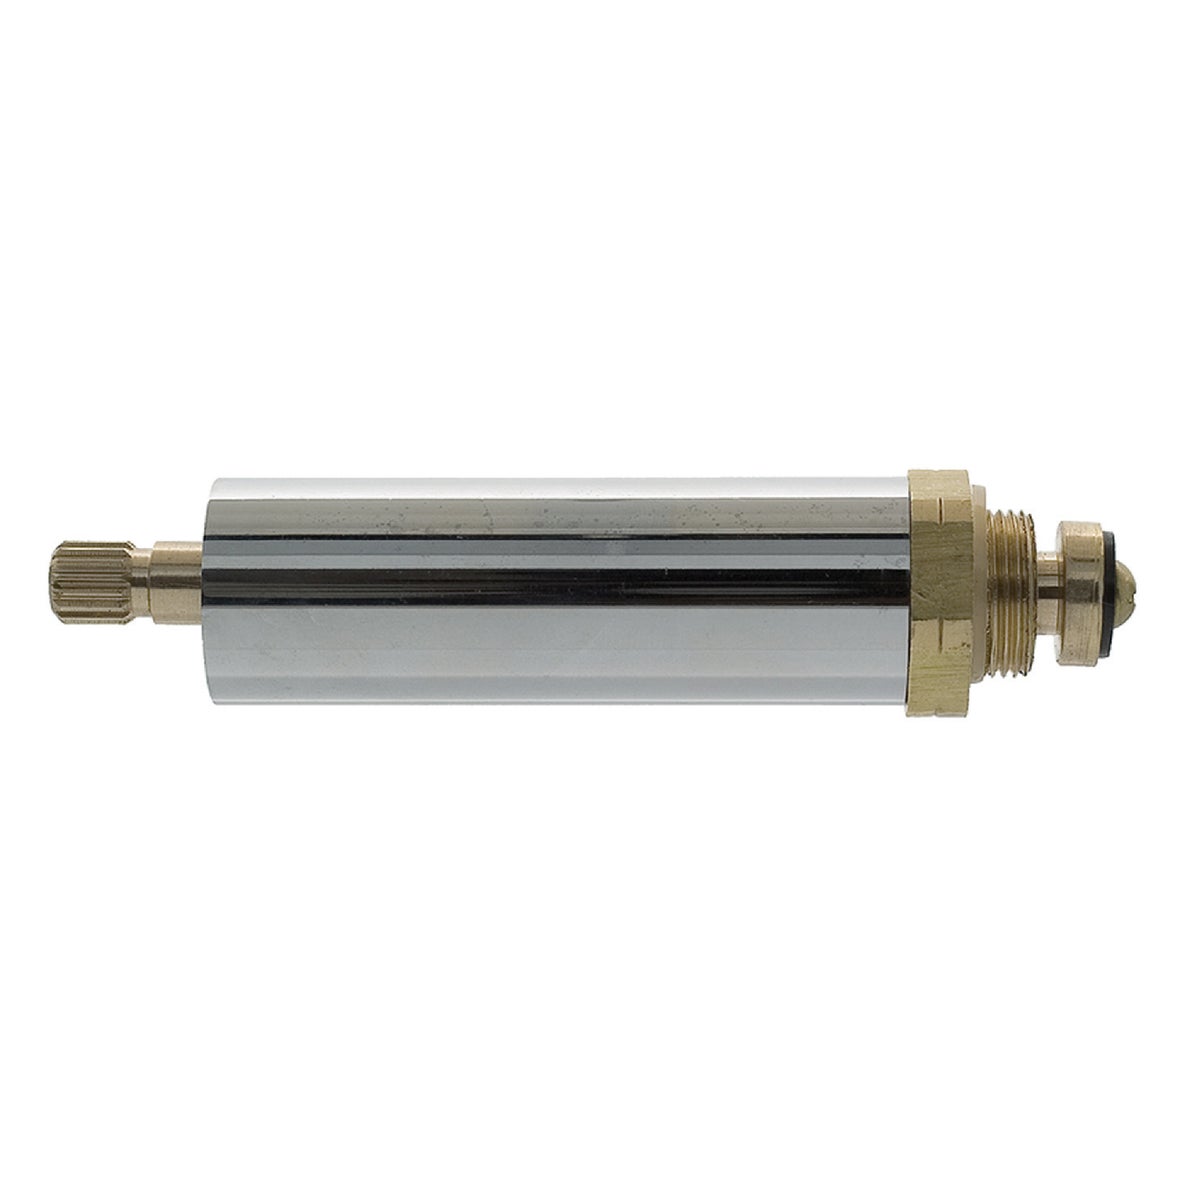 Item 404461, Install this Danco 10C-5C Cold Stem for Eljer to fix your leaky faucet.